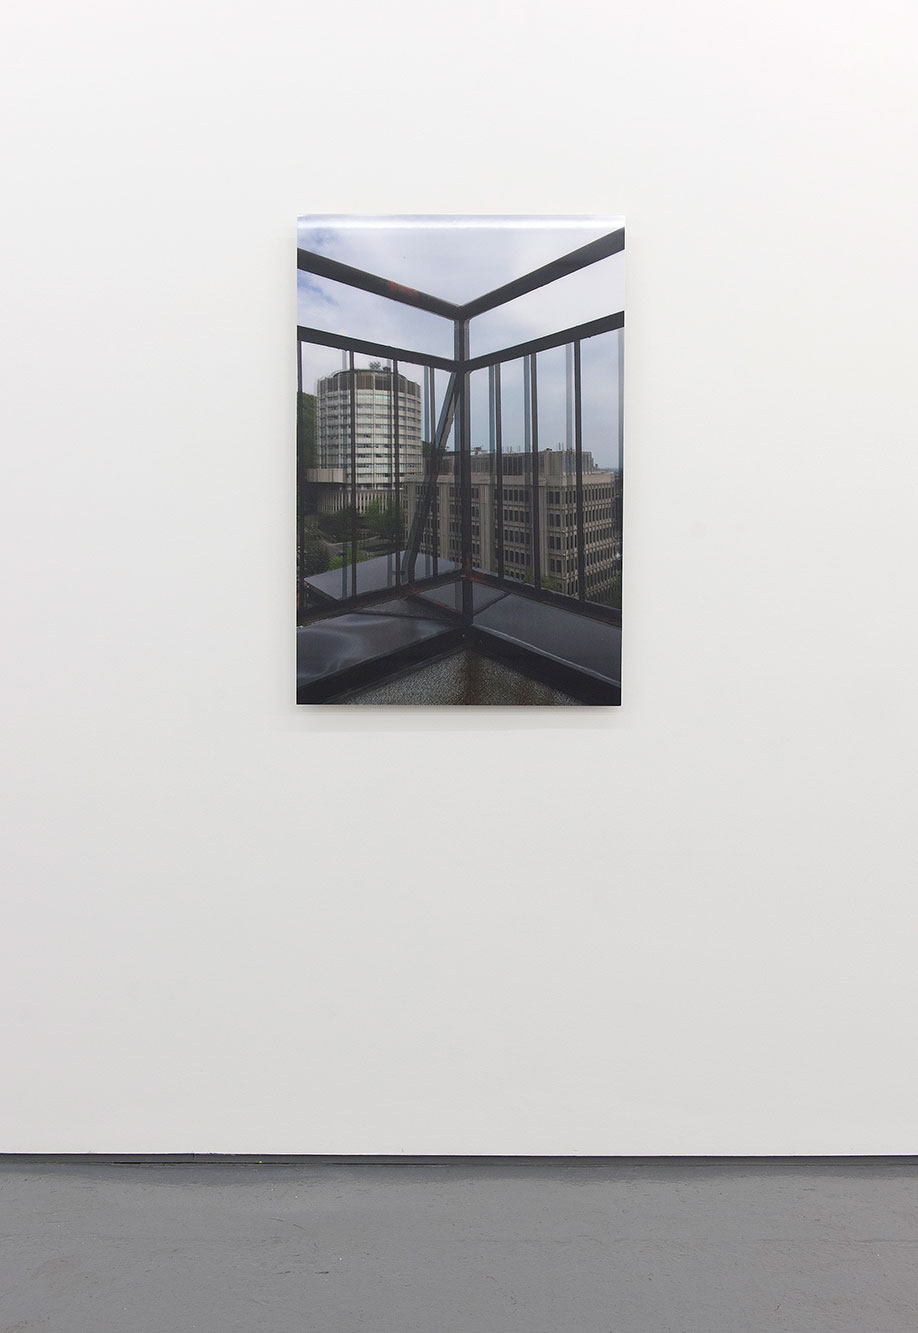 <b>Title: </b>Displaced rectangles in a hybrid, residual vertical (or standing at the edge and seeing double)<br /><b>Year: </b>2016<br /><b>Medium: </b>Lenticular print on aluminium<br /><b>Size: </b>91 x 61 cm